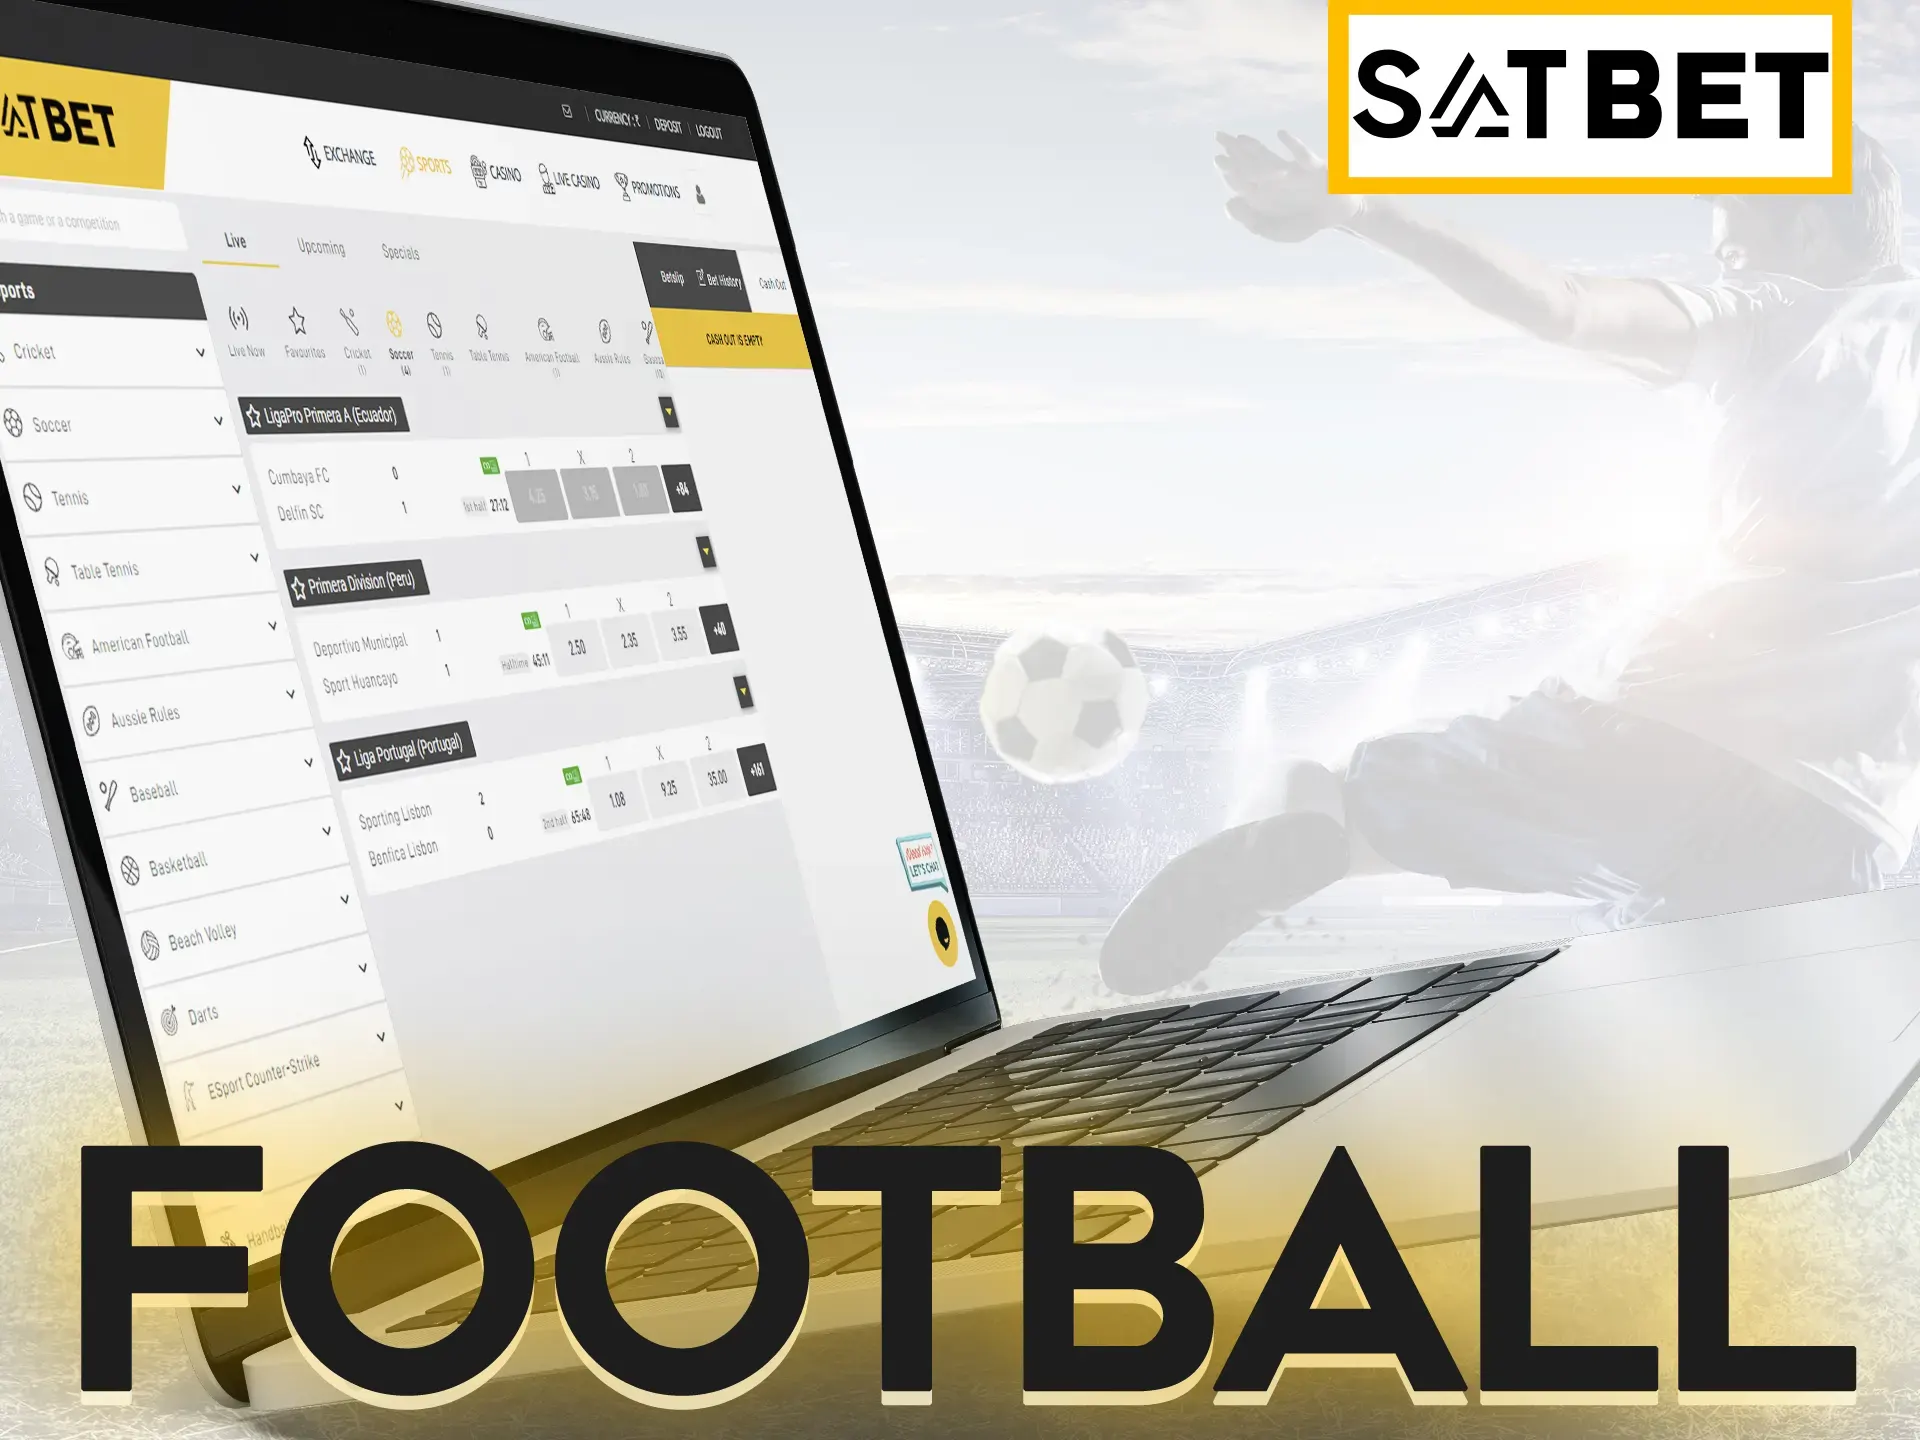 Win money by playing on most profitable football players at Satbet.